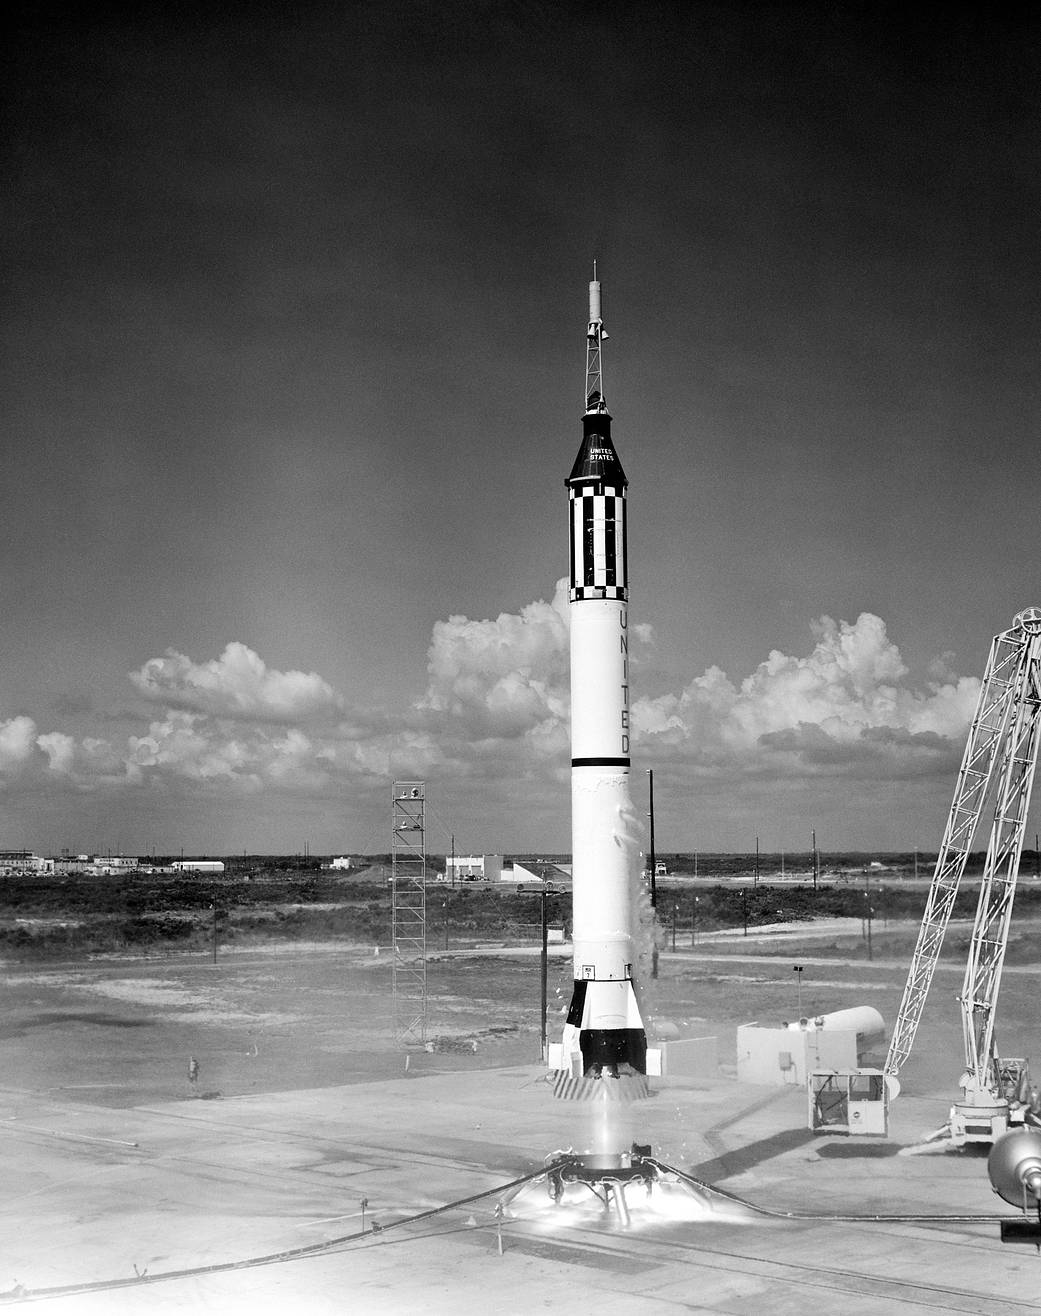 Launch of  the Mercury-Redstone 3 (MR-3) rocket for the Freedom 7 mission, the US's first crewed spaceflight, for which Katherine Johnson did the analysis.